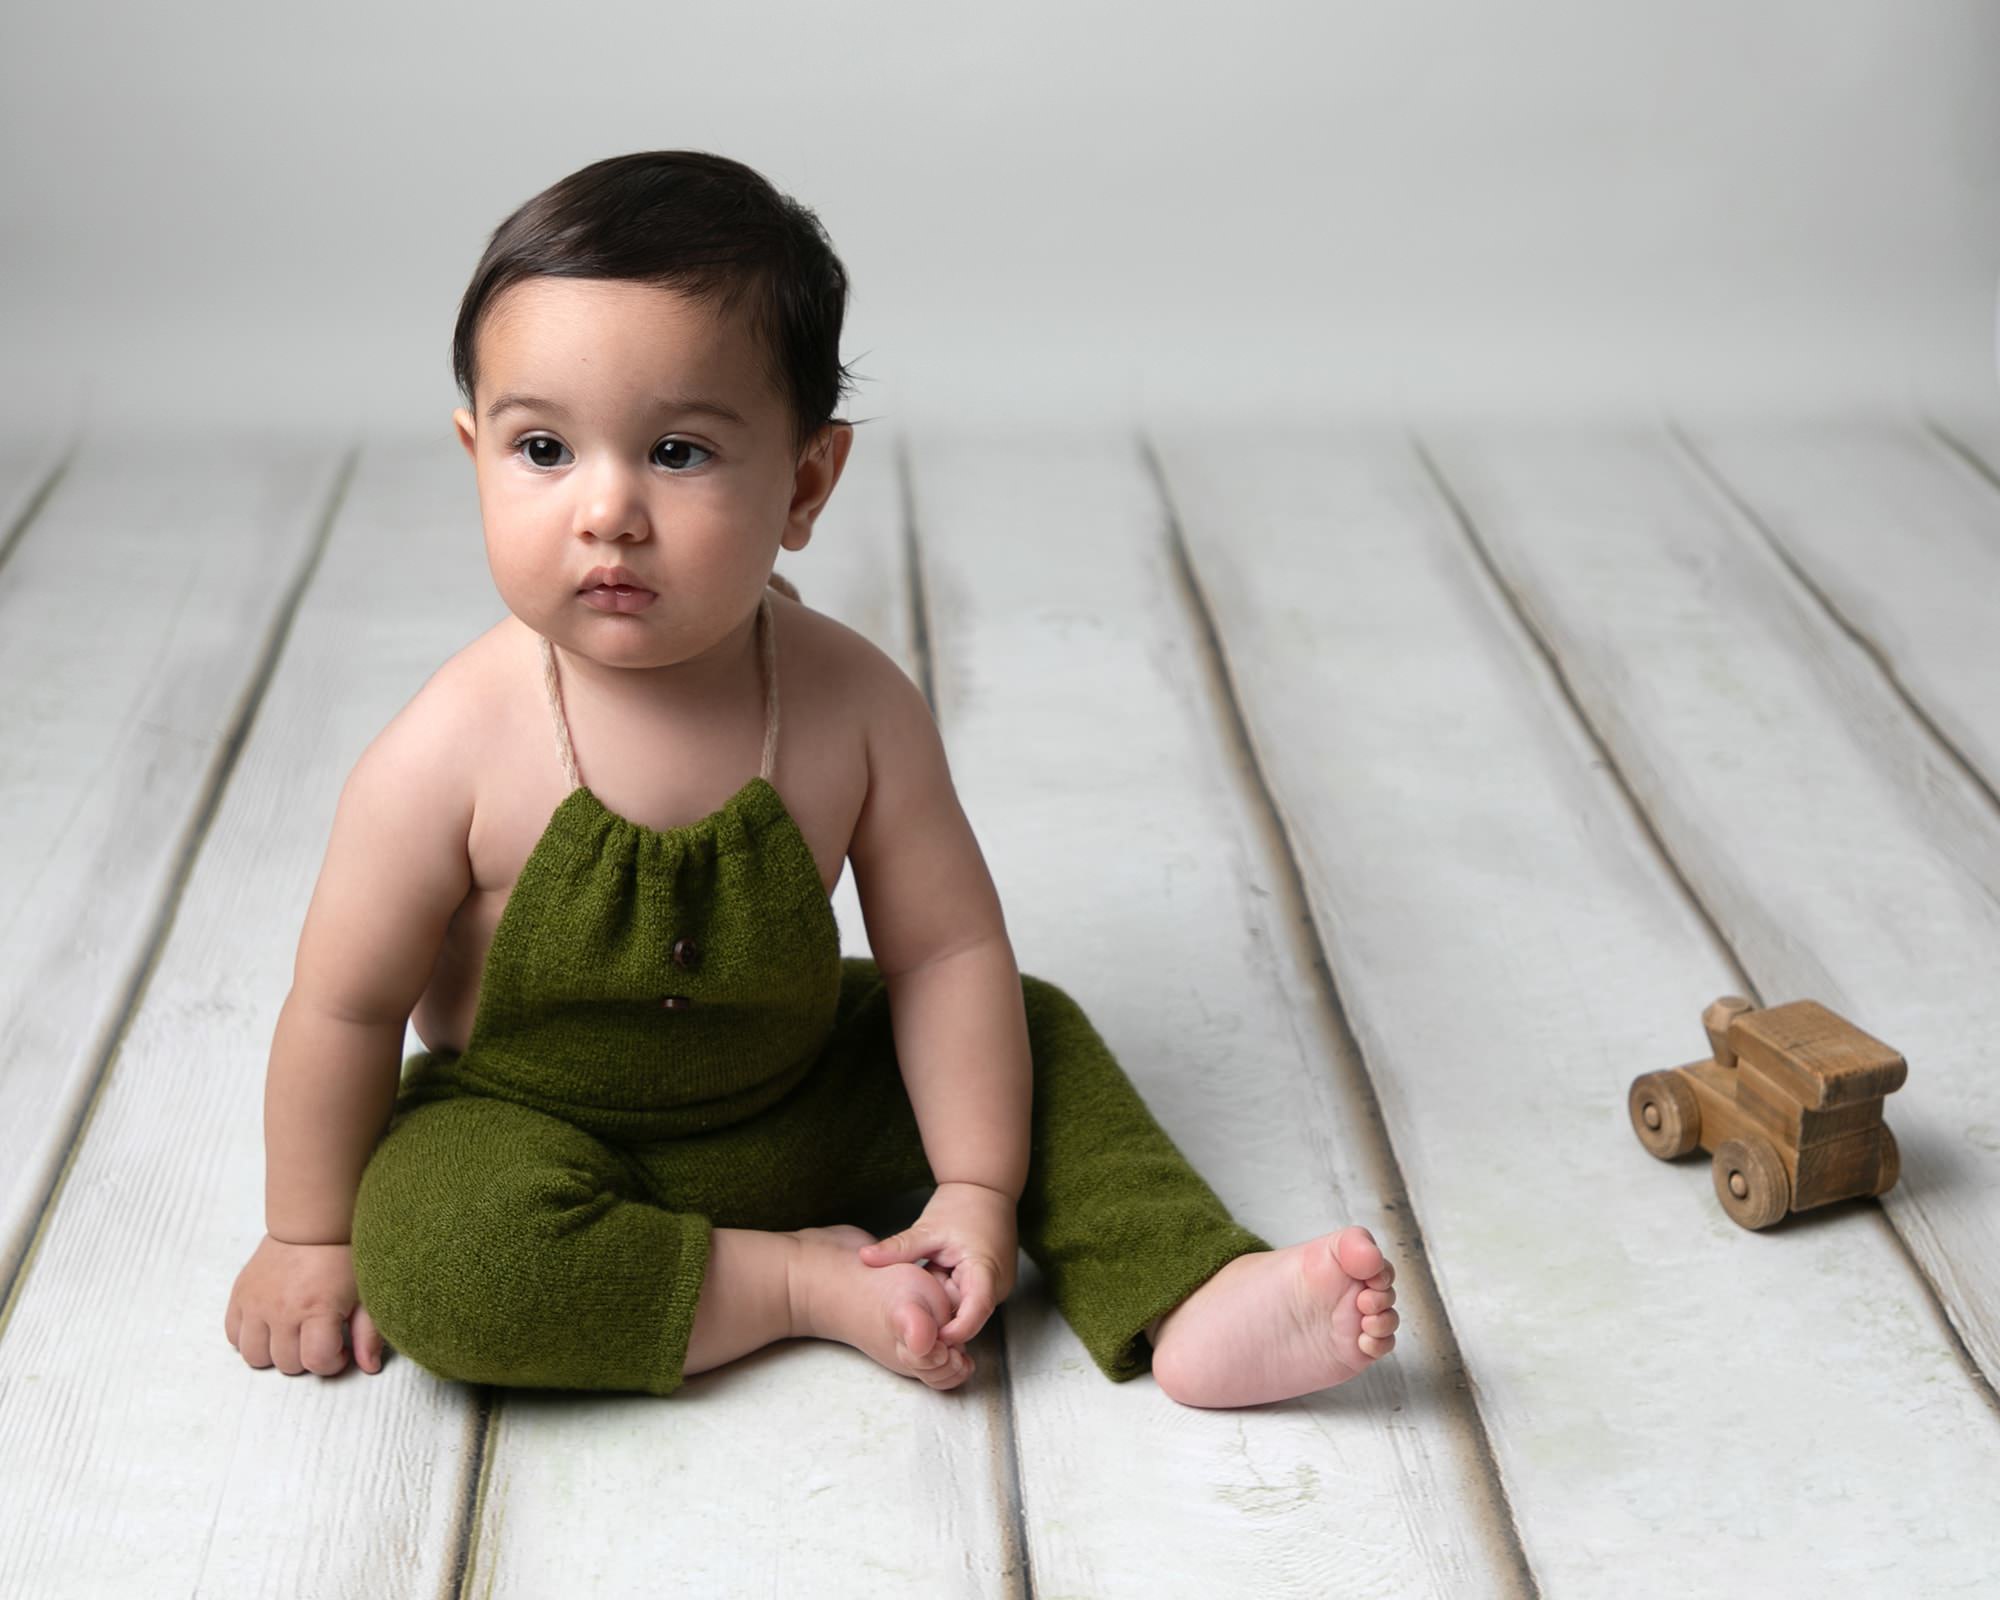 Baby boy in green dungarees, sat on cream wooden floor with wooden toy car. Image taken at photoshoot with Glasgow Baby Photographer